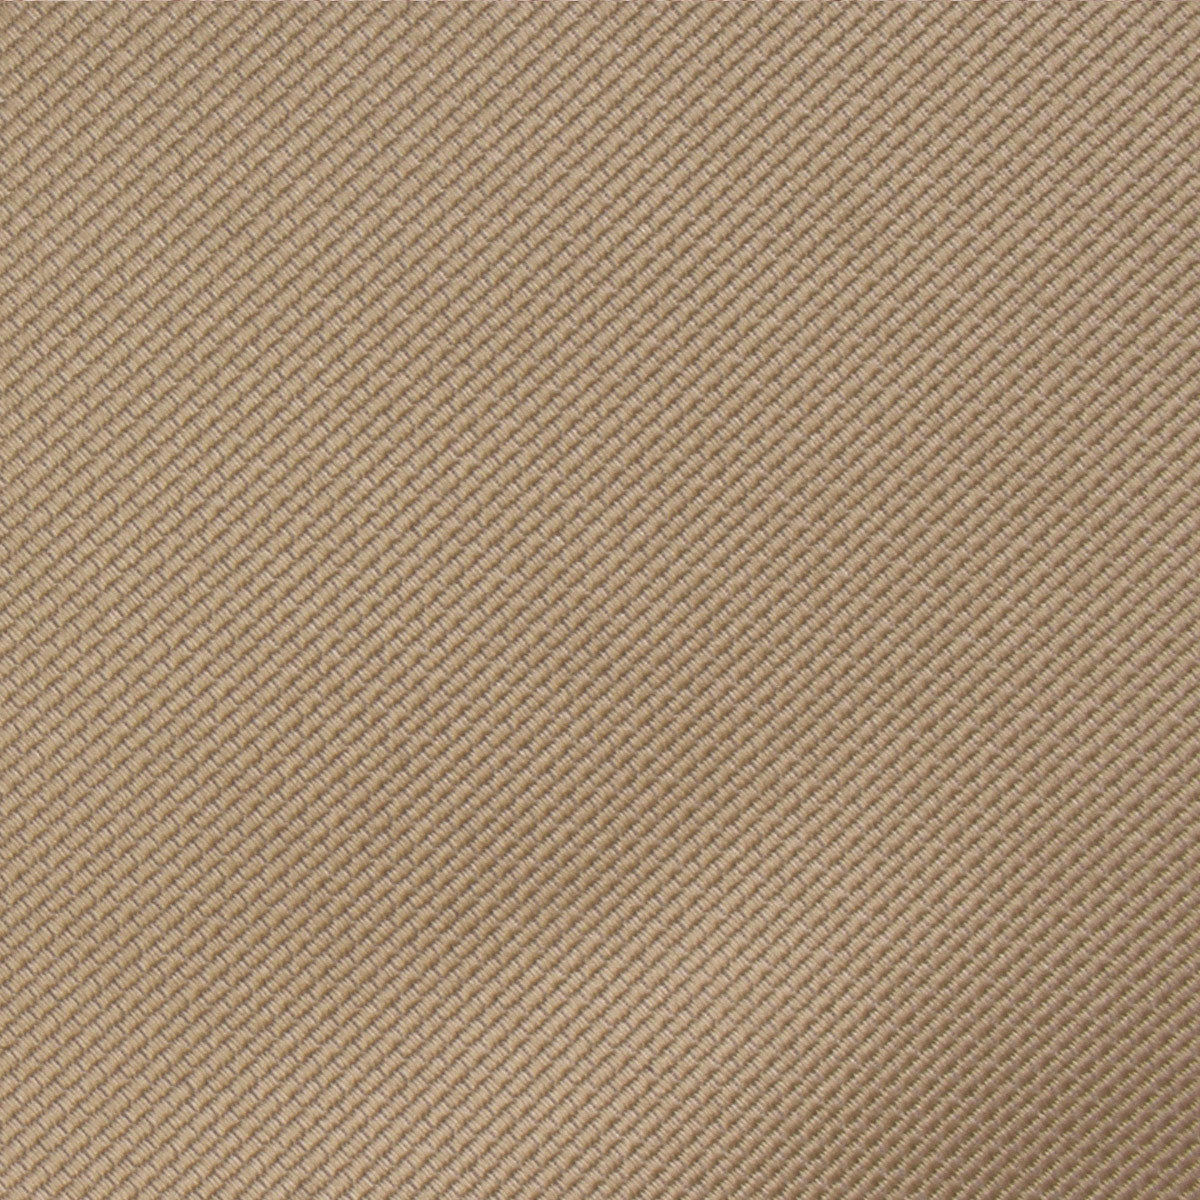 Champagne Gold Metallic Weave Self Bow Tie Fabric